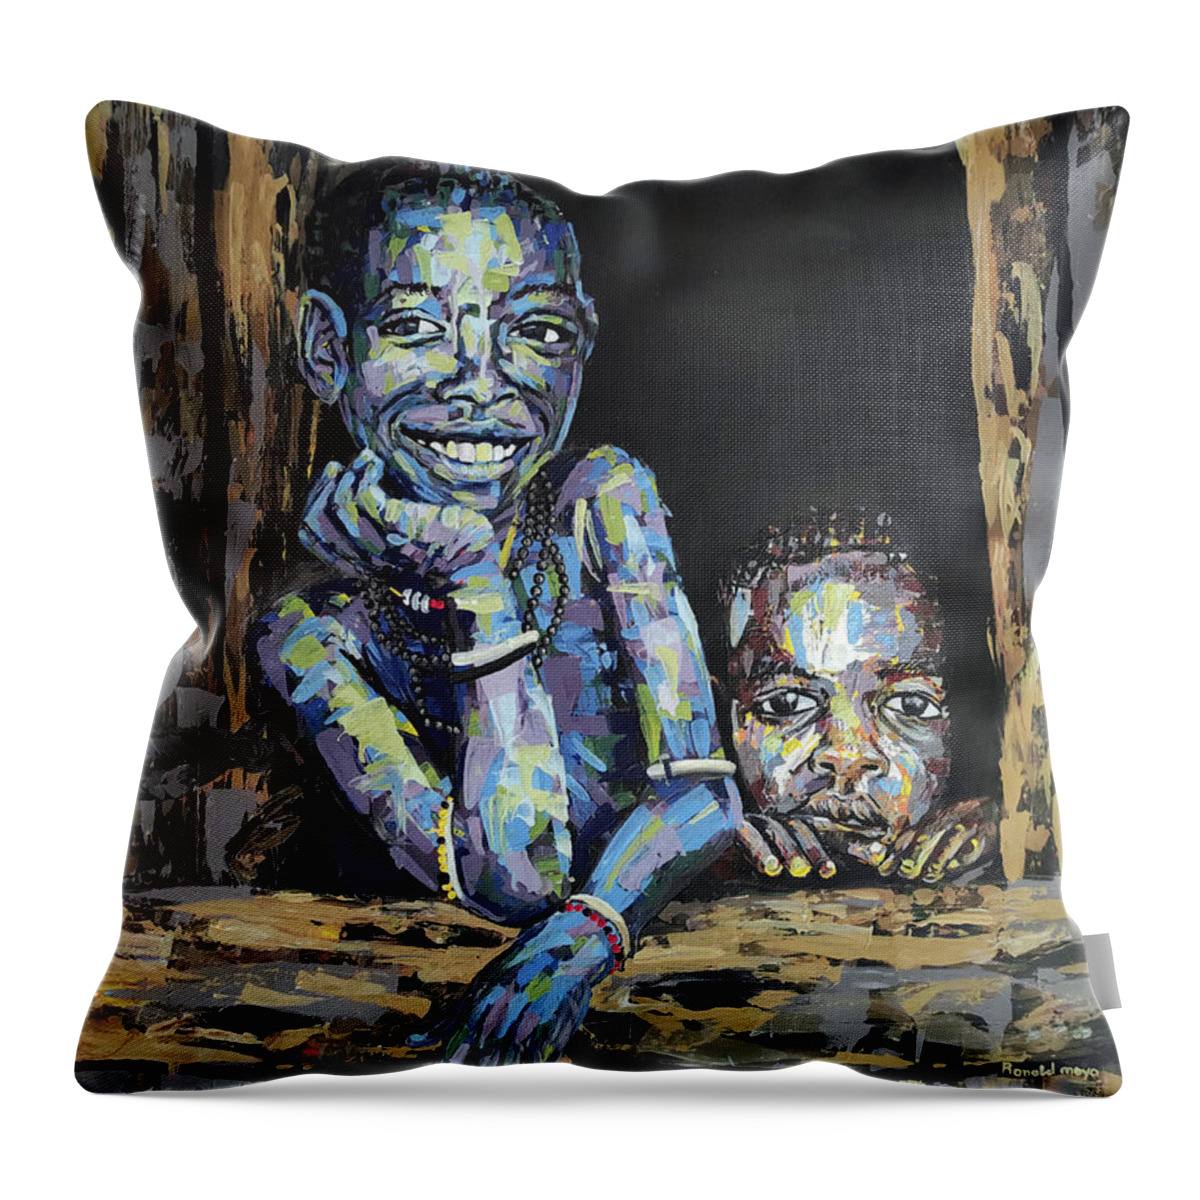  Throw Pillow featuring the painting Hello Stranger by Ronnie Moyo